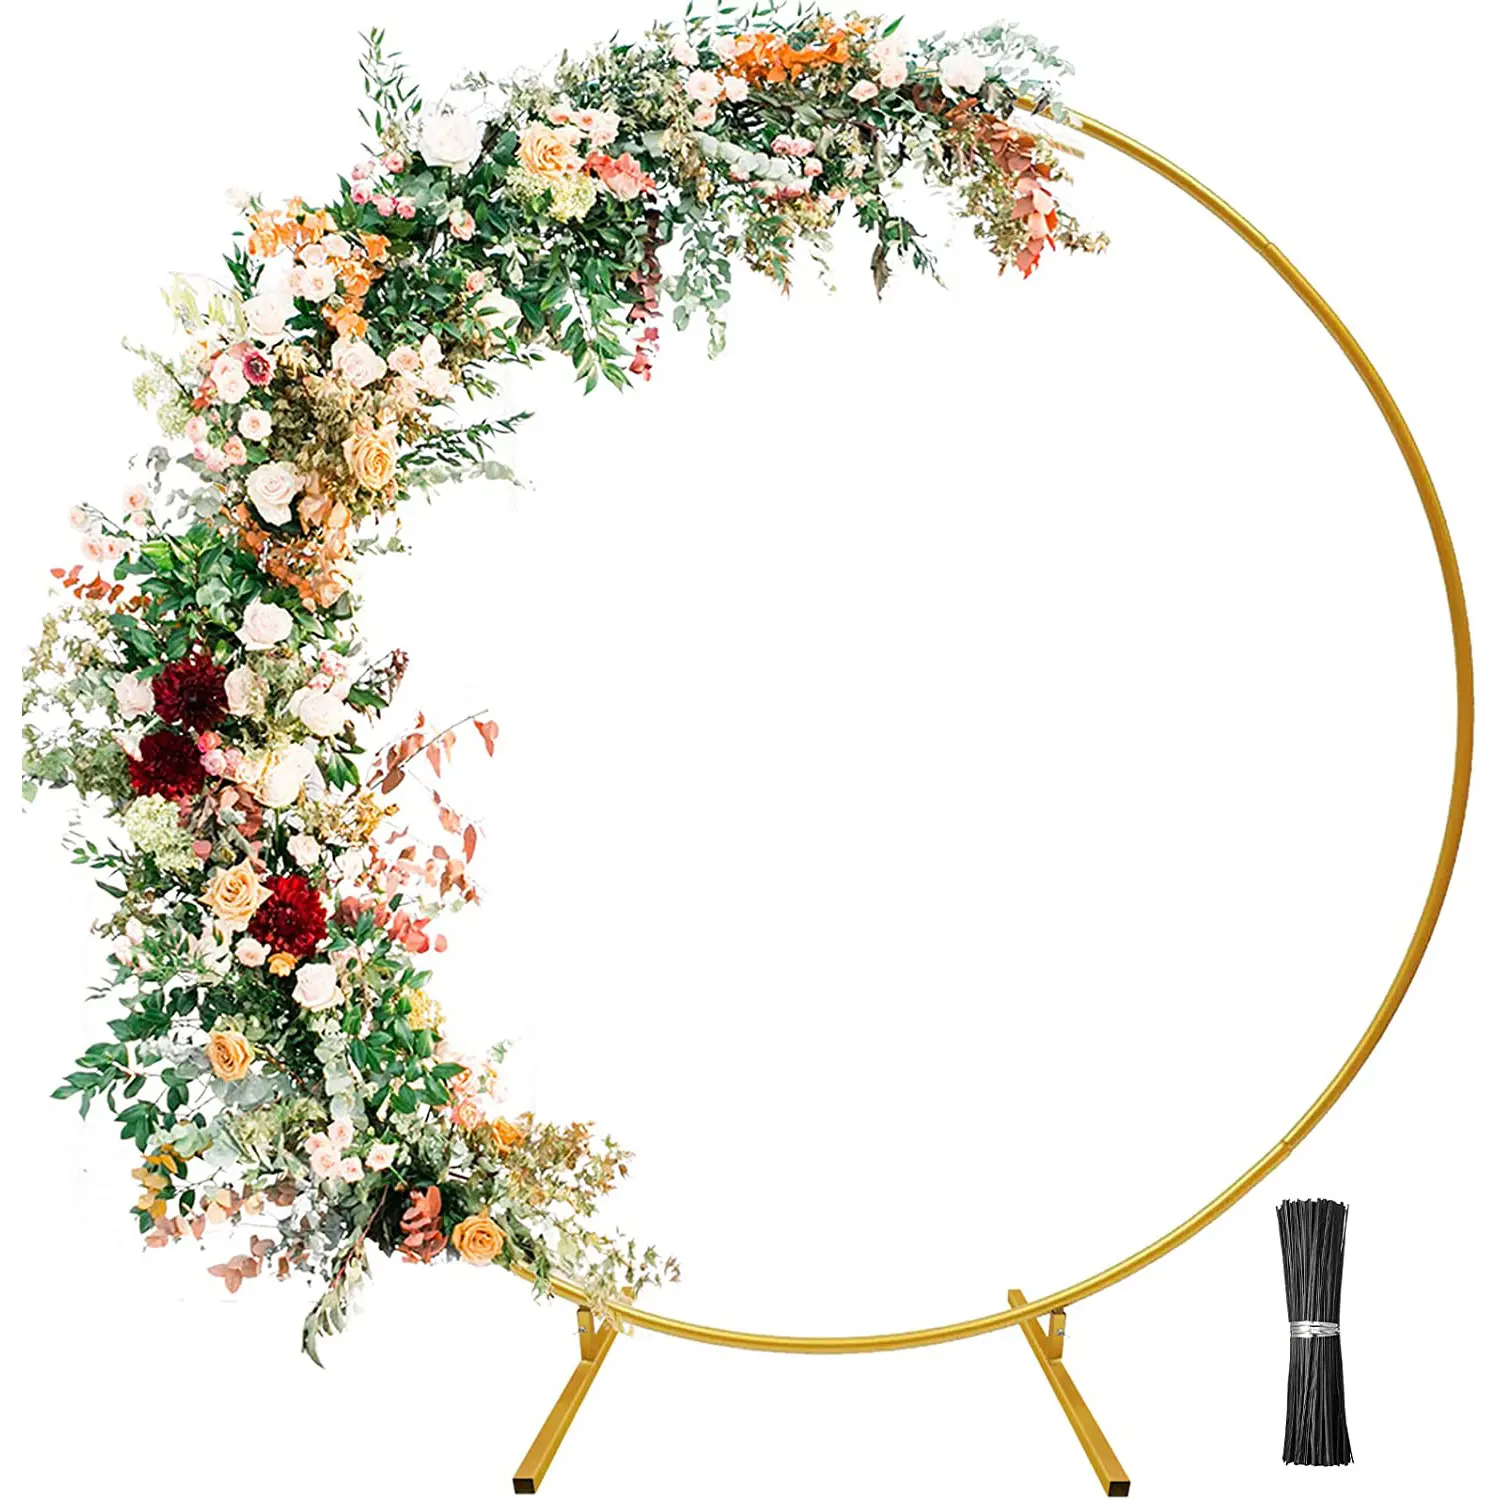 6.6Ft Circular Metal Wedding Arch Stand Decoration Backdrop Balloon Metal Arch for Balls